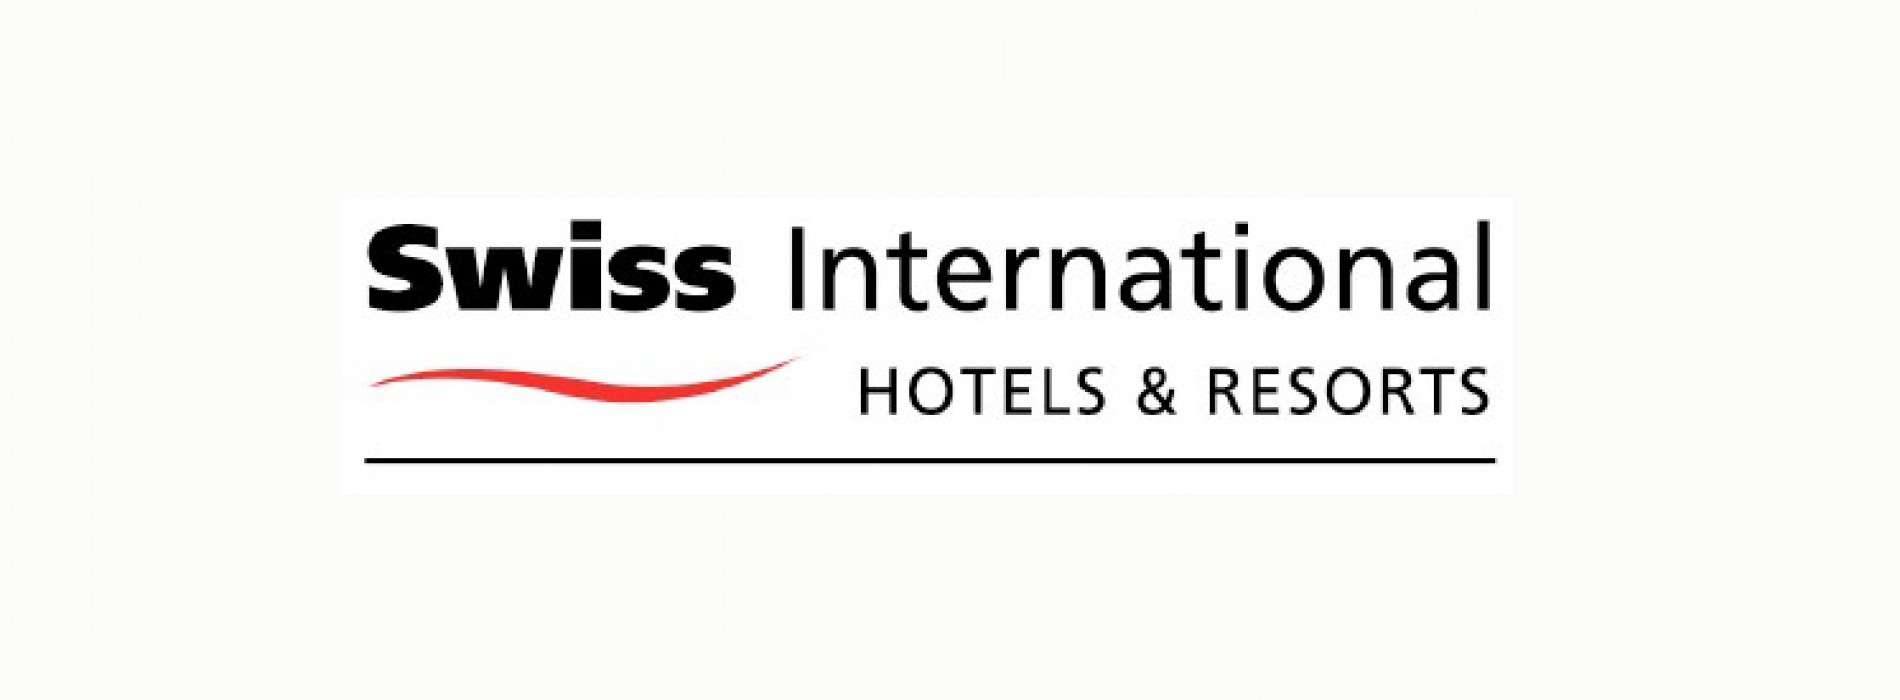 Swiss International and IDS Next enters into partnership